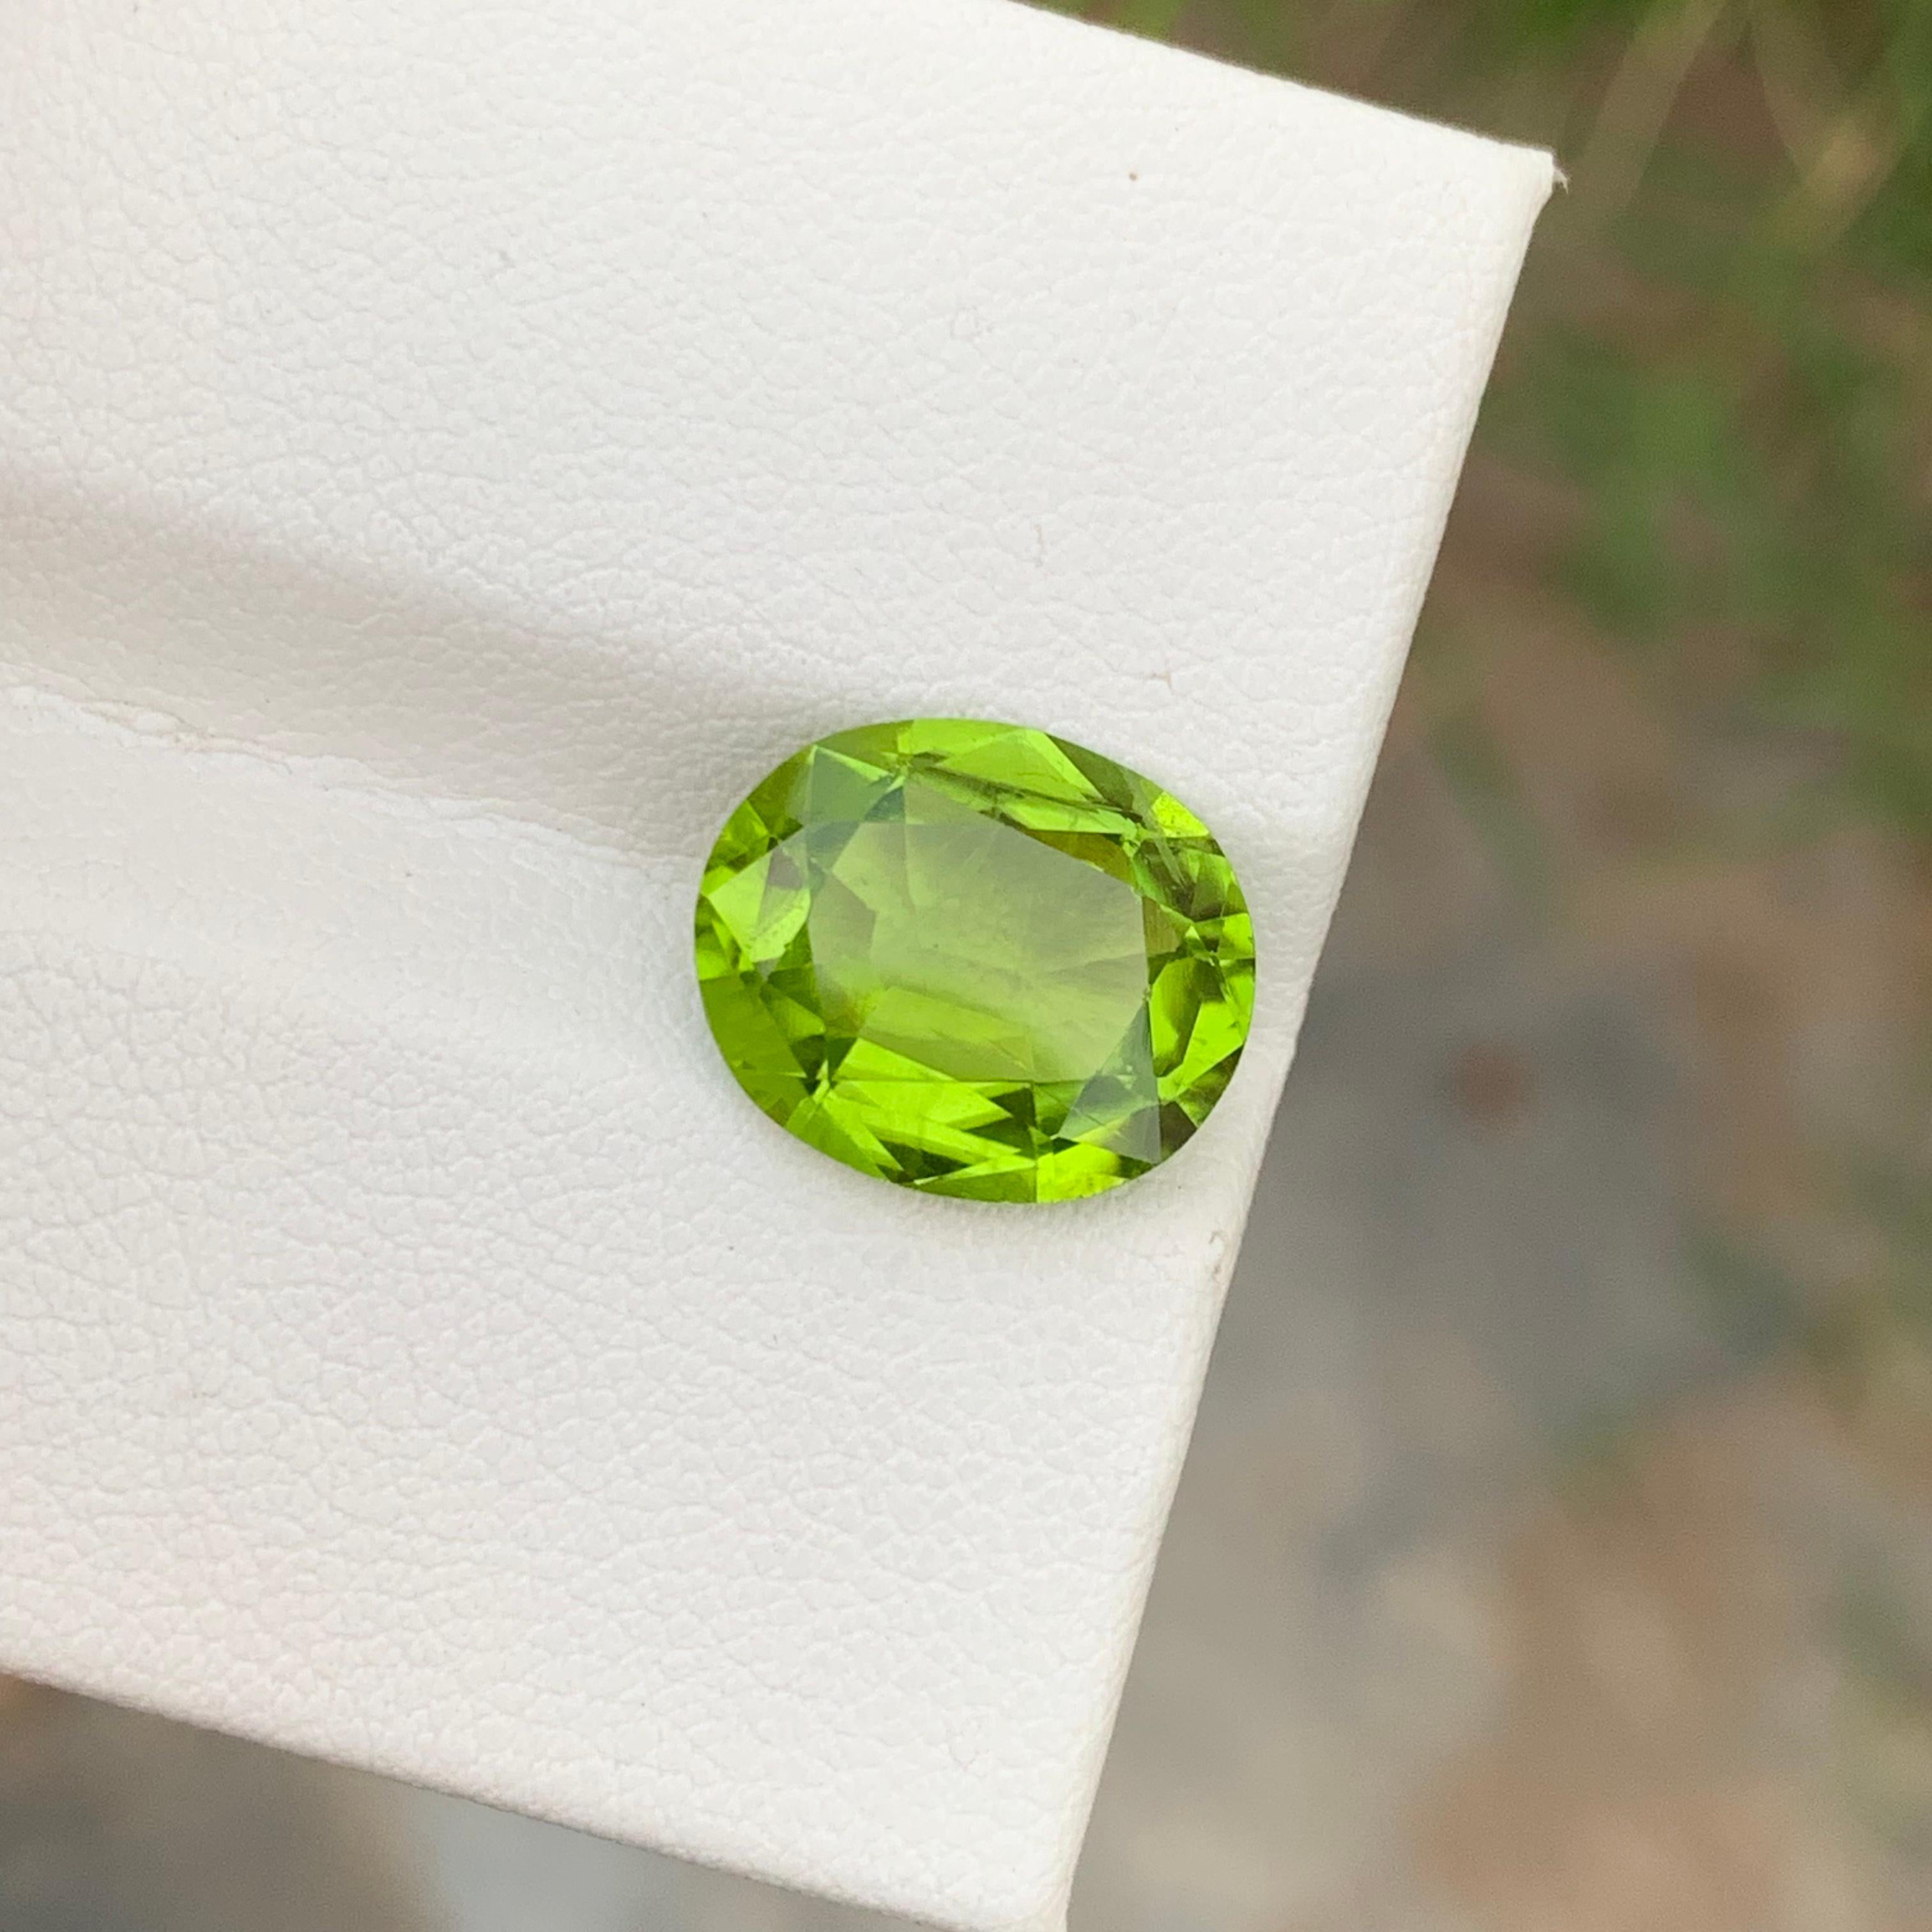 Loose Peridot 
Weight: 5.35 Carats 
Dimension: 12.4x10.5x5.6 Mm
Origin: Suppat Valley Mansehra Pakistan 
Color: Green
Shape: Oval
Treatment: Non
Certificate: On Customer Demand 
Peridot, often referred to as the 